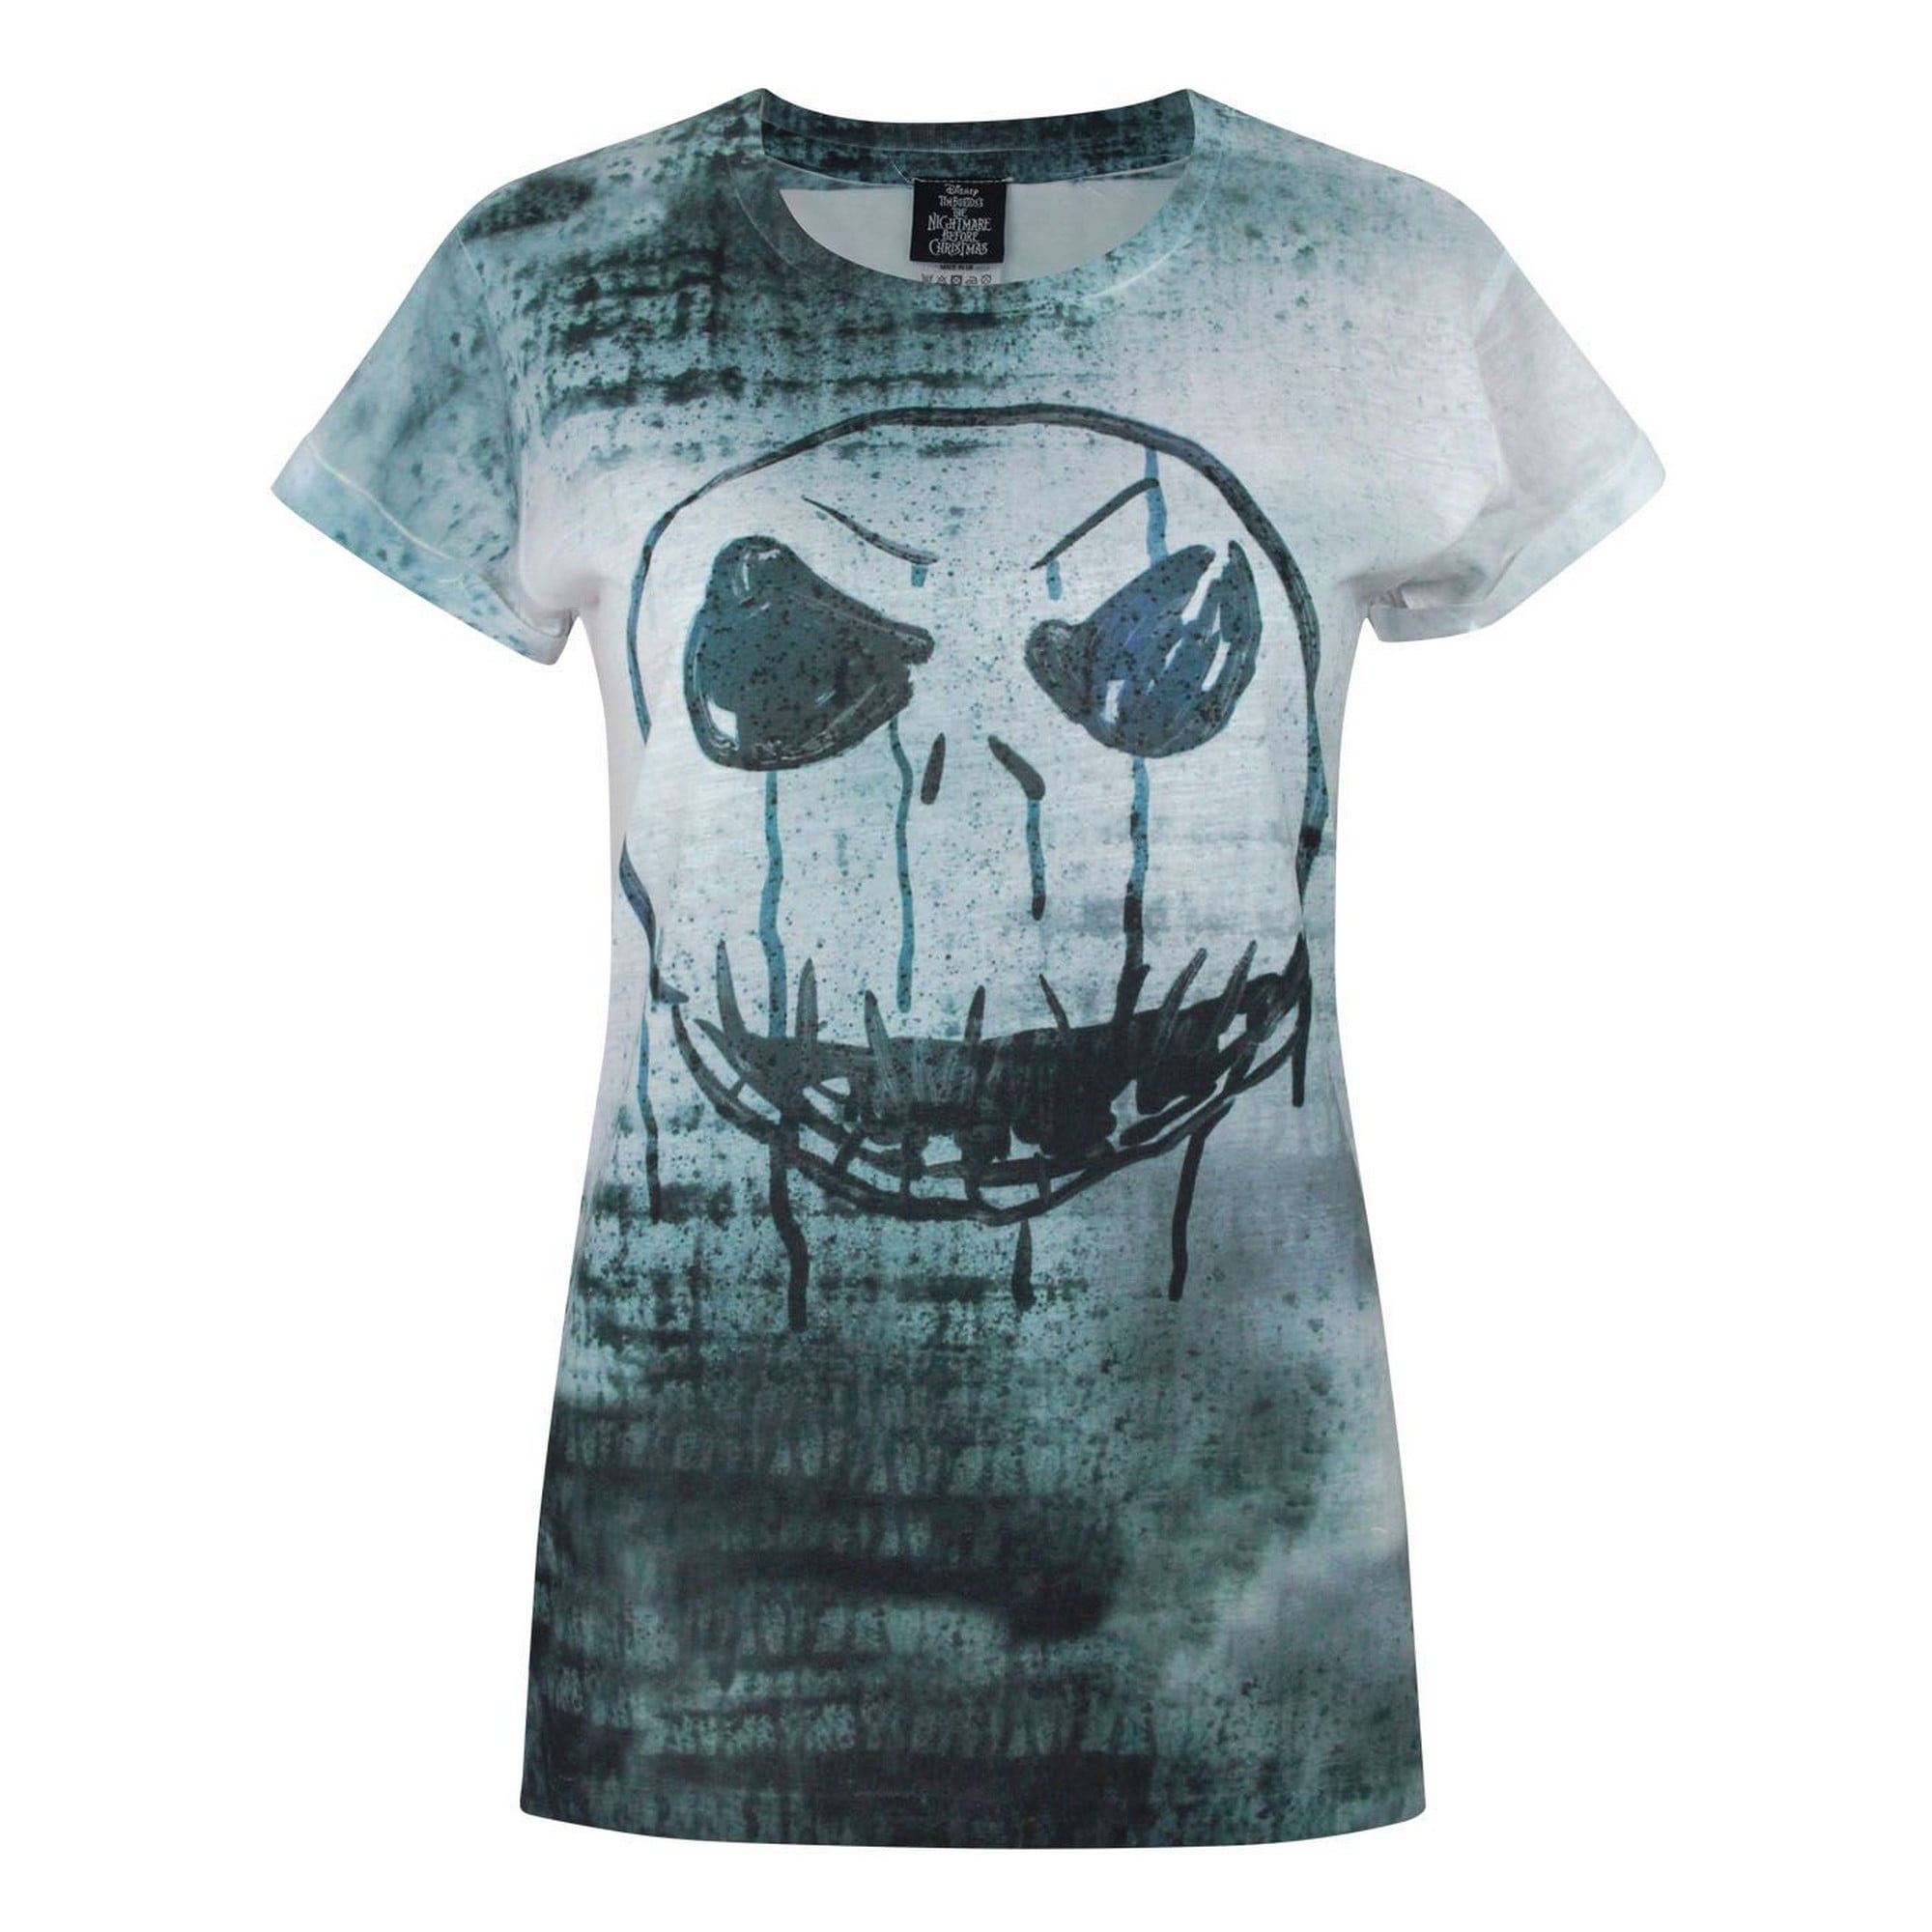 S-3XL New Jack Skellington The Nightmare Before Christmas Women Top Sublimation Style 3